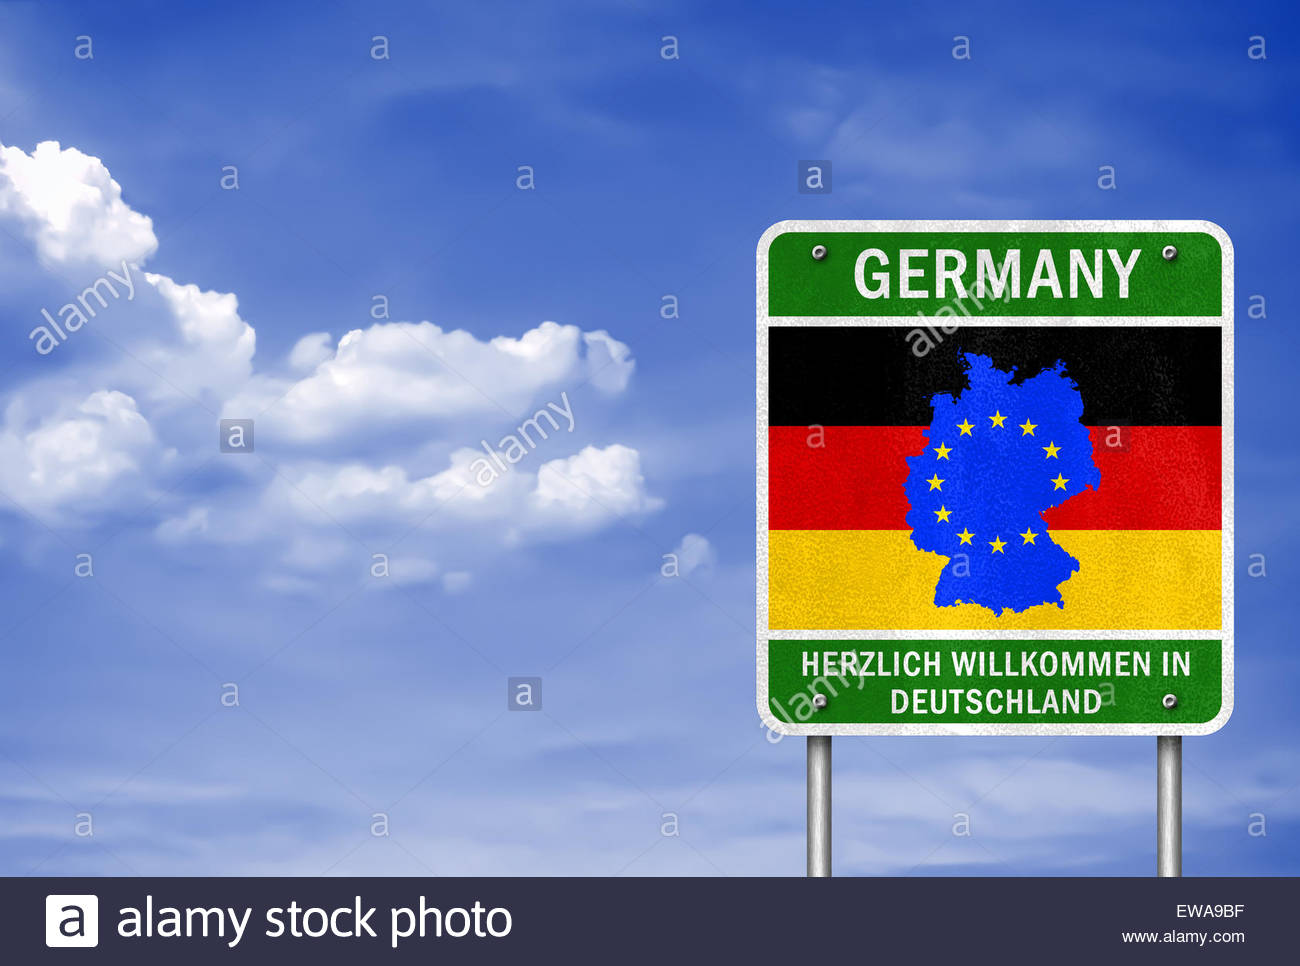 Welcome in Germany - German road sign with the German flag and map